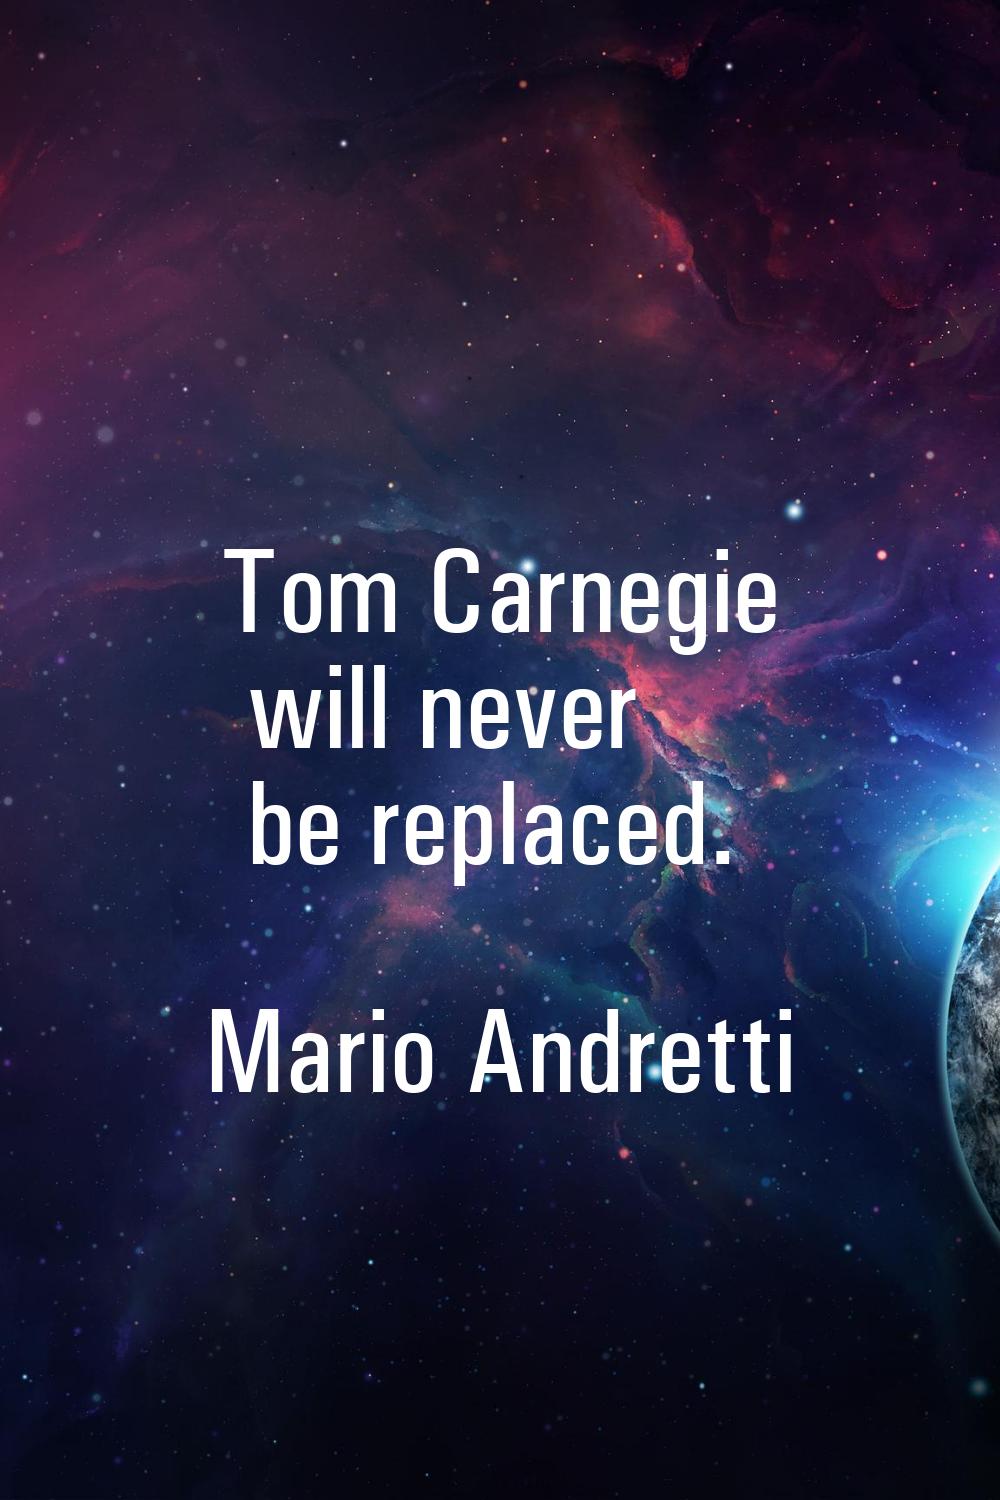 Tom Carnegie will never be replaced.